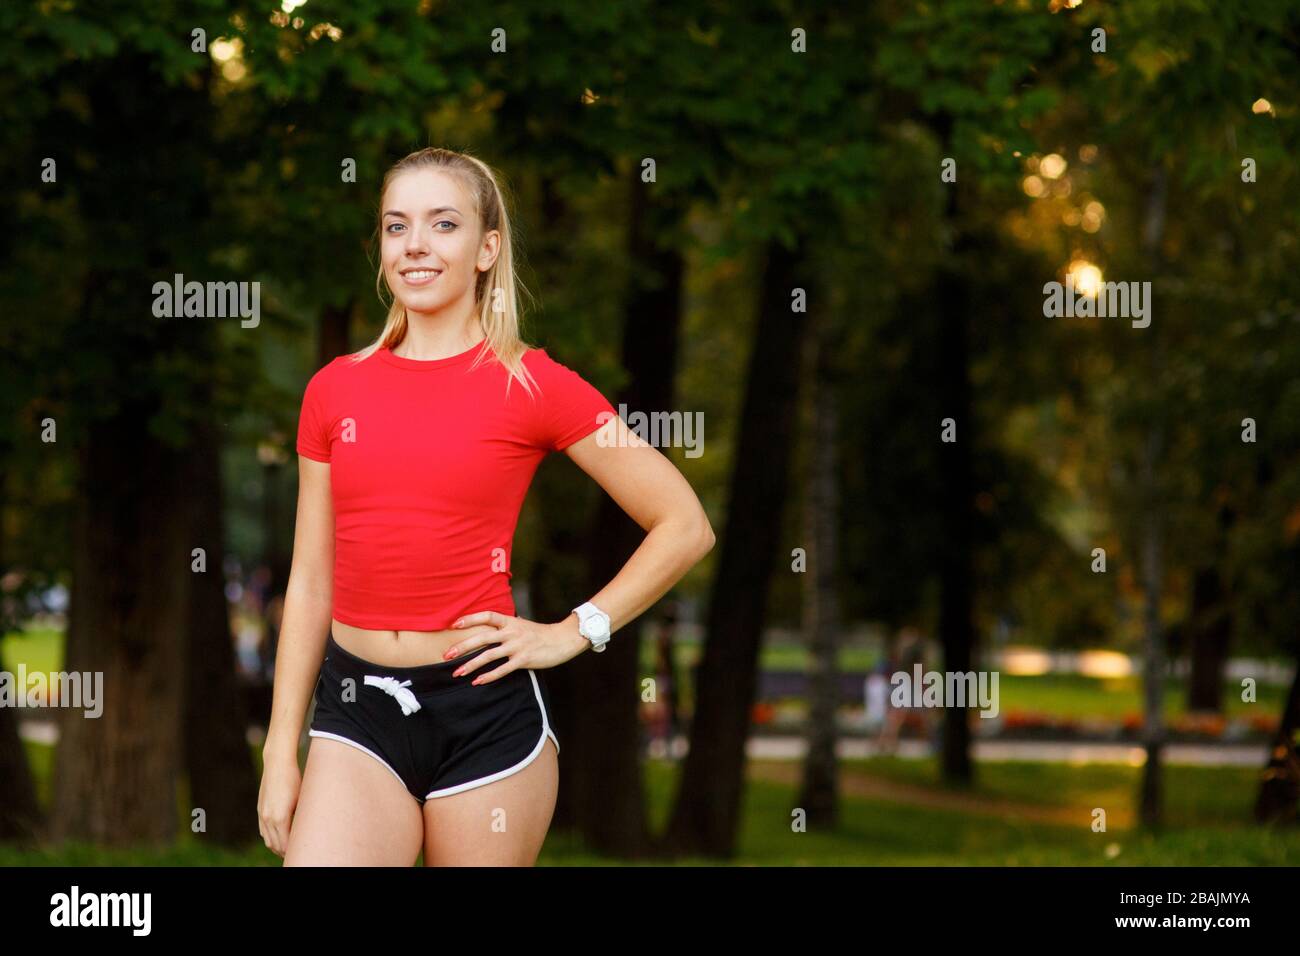 Fit pretty black girl in sports bra and shorts stretching in a wooded area  or forest Stock Photo - Alamy